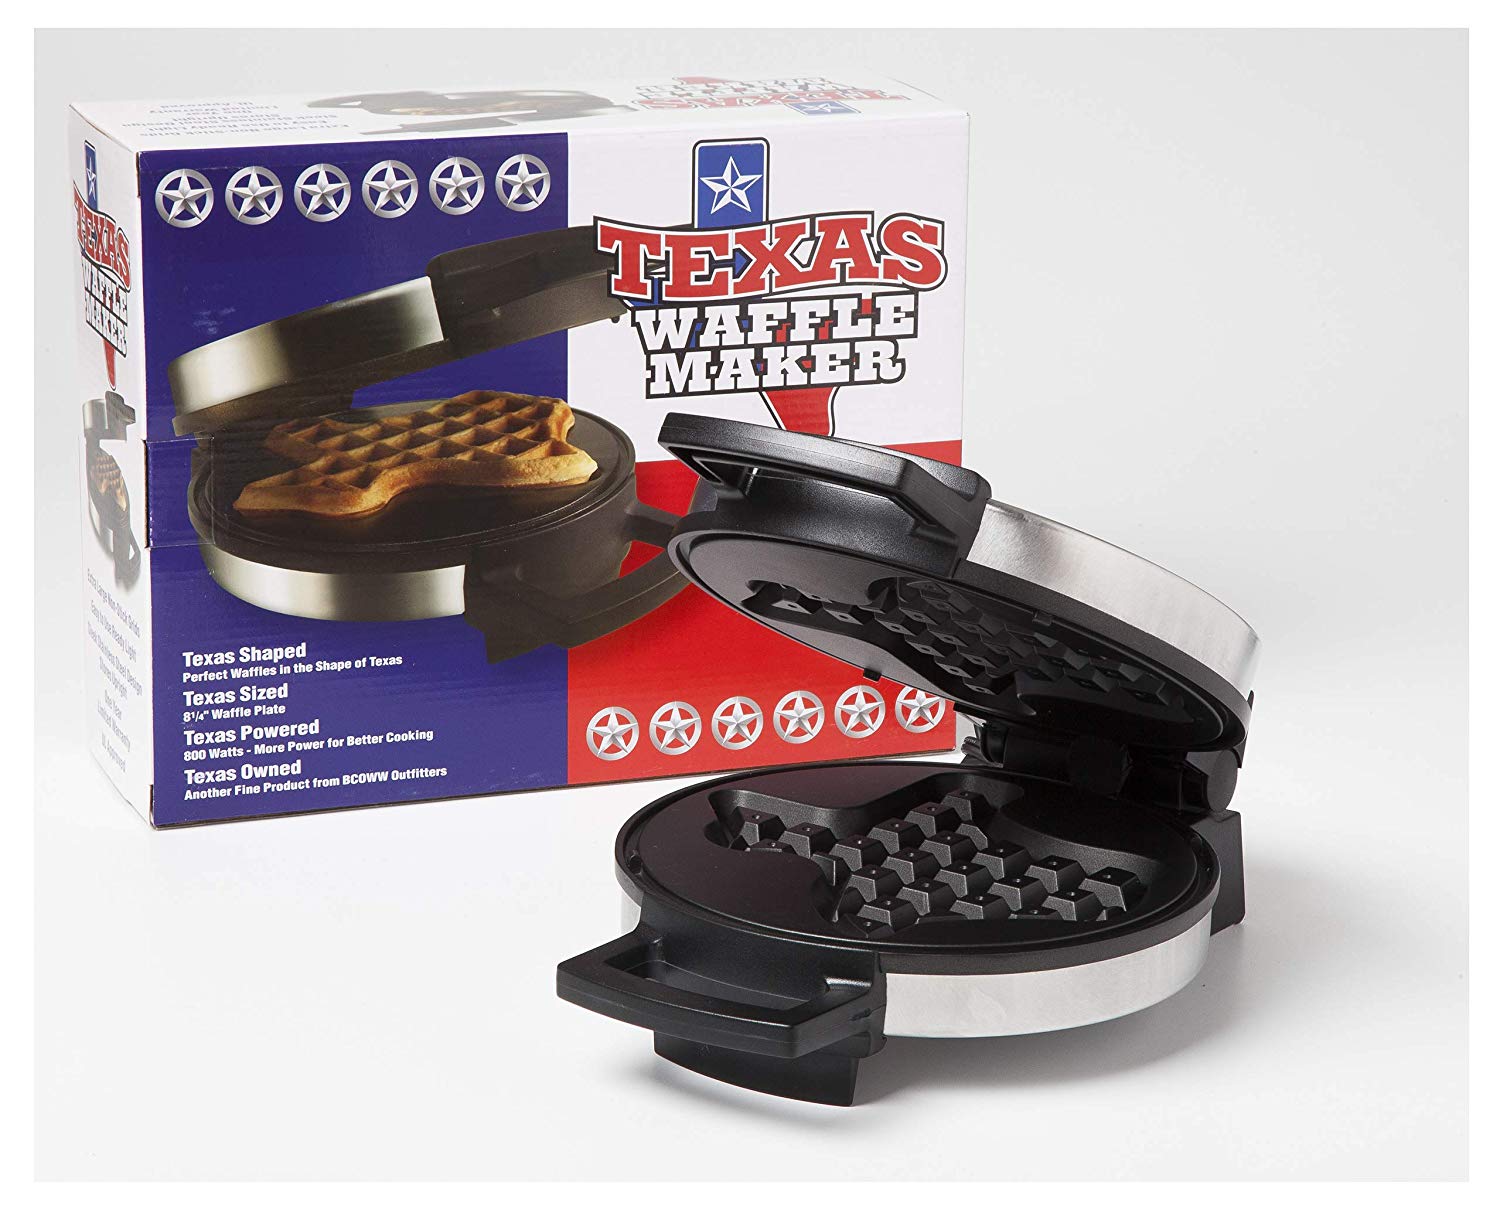 The Texas Waffle Maker Review